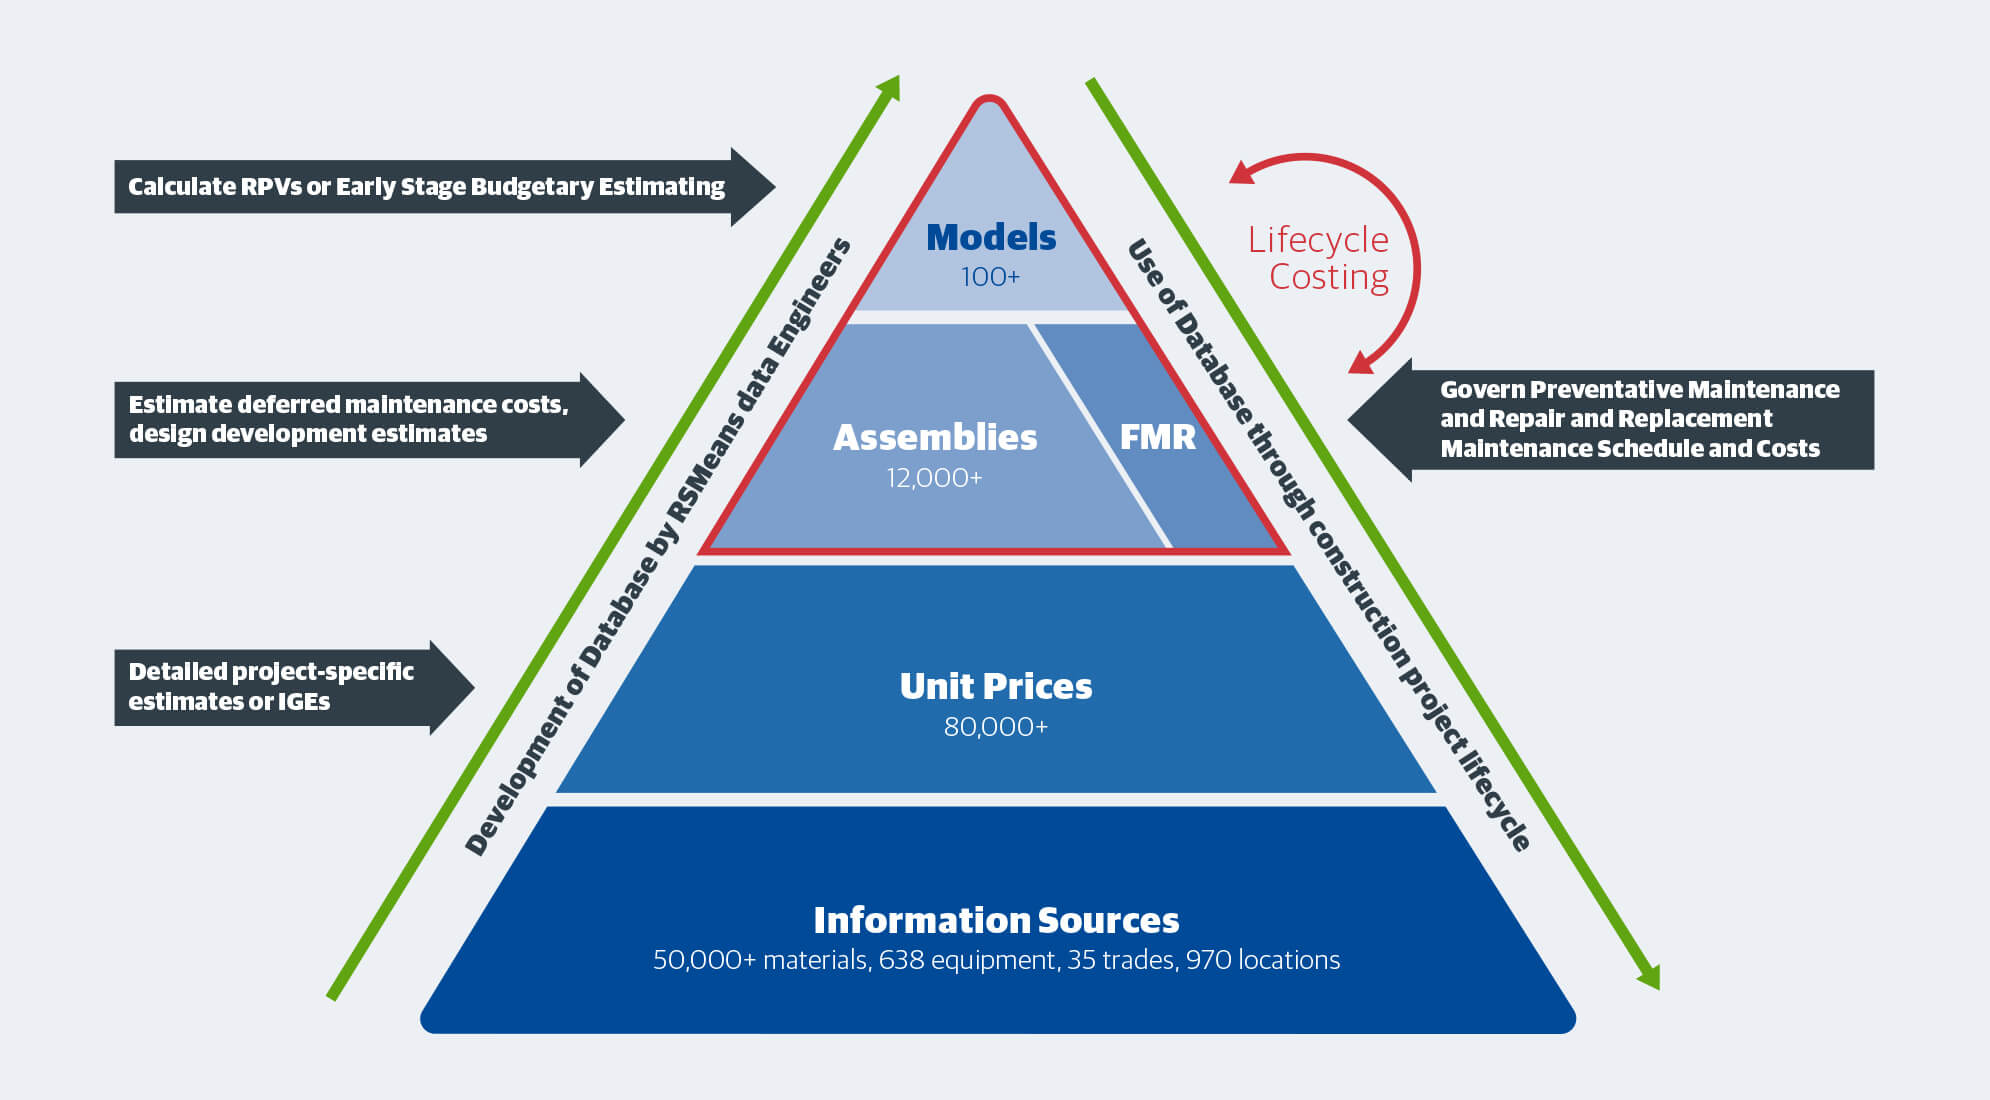 Hierarchy of construction costs with unit prices being the most granular and models being the most general